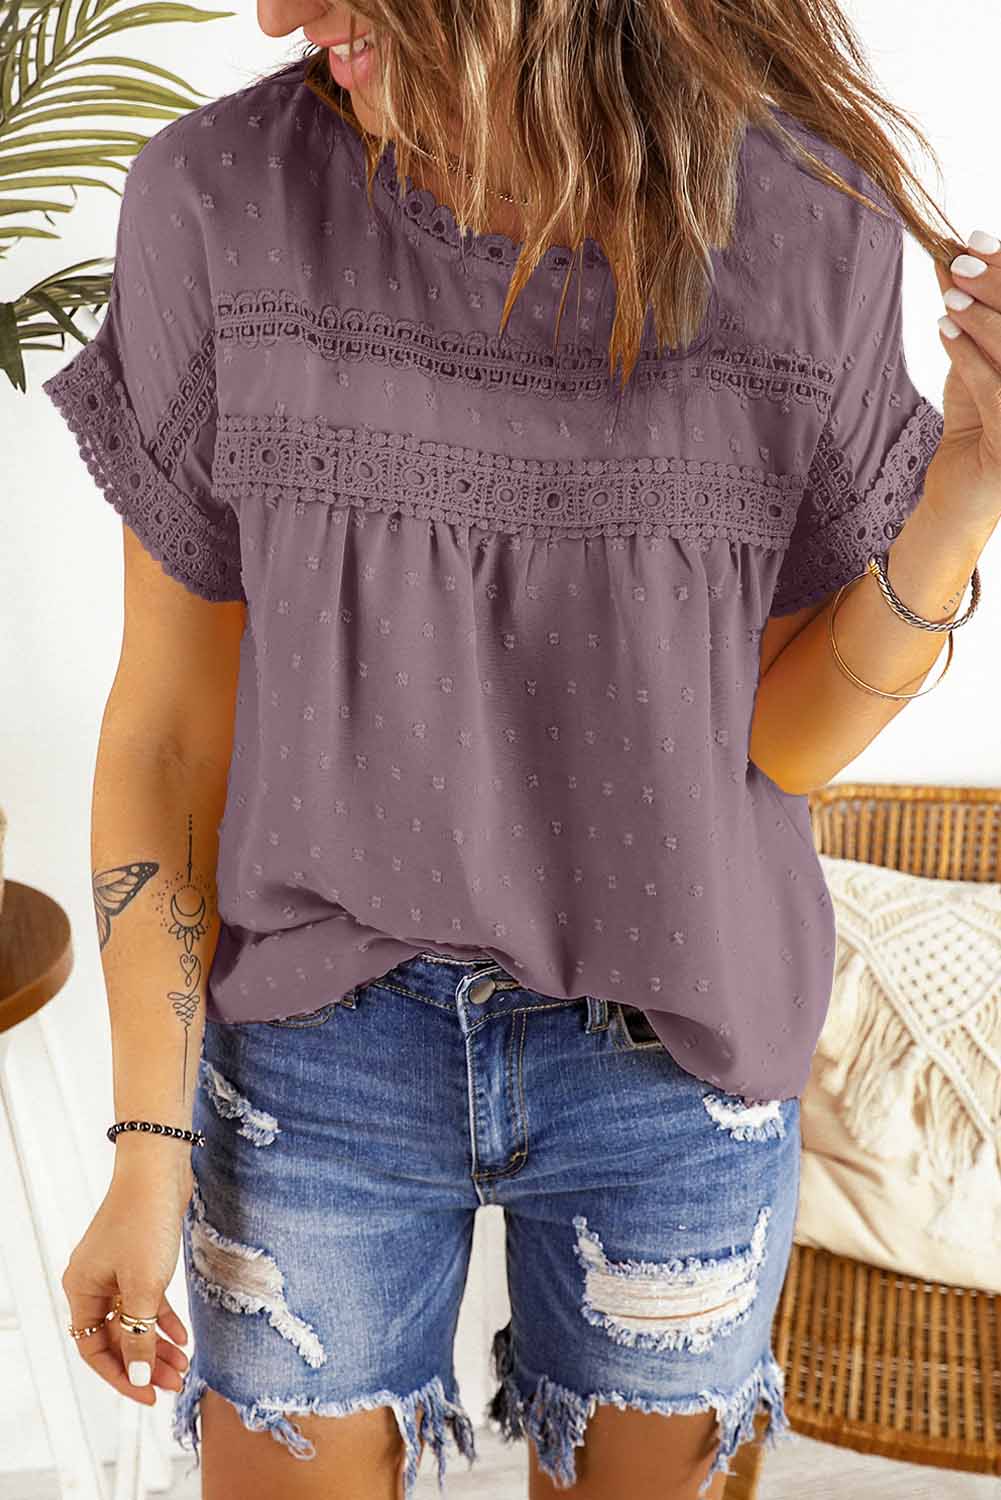 Swiss Dot Decorative Back Button Short Sleeve Womens Blouse Top with Crochet Lace Detail on Bust, Neckline, and Sleeve Trim | Available in 12 Colors including Sand Tan Beige, White, Hunter Forest Green, Black, Dusty Purple Mauve, Lilac Purple, Misty Blue, French Navy Blue, Charcoal Gray Grey, Burgundy Wine Maroon, and Rust Orange Terracotta